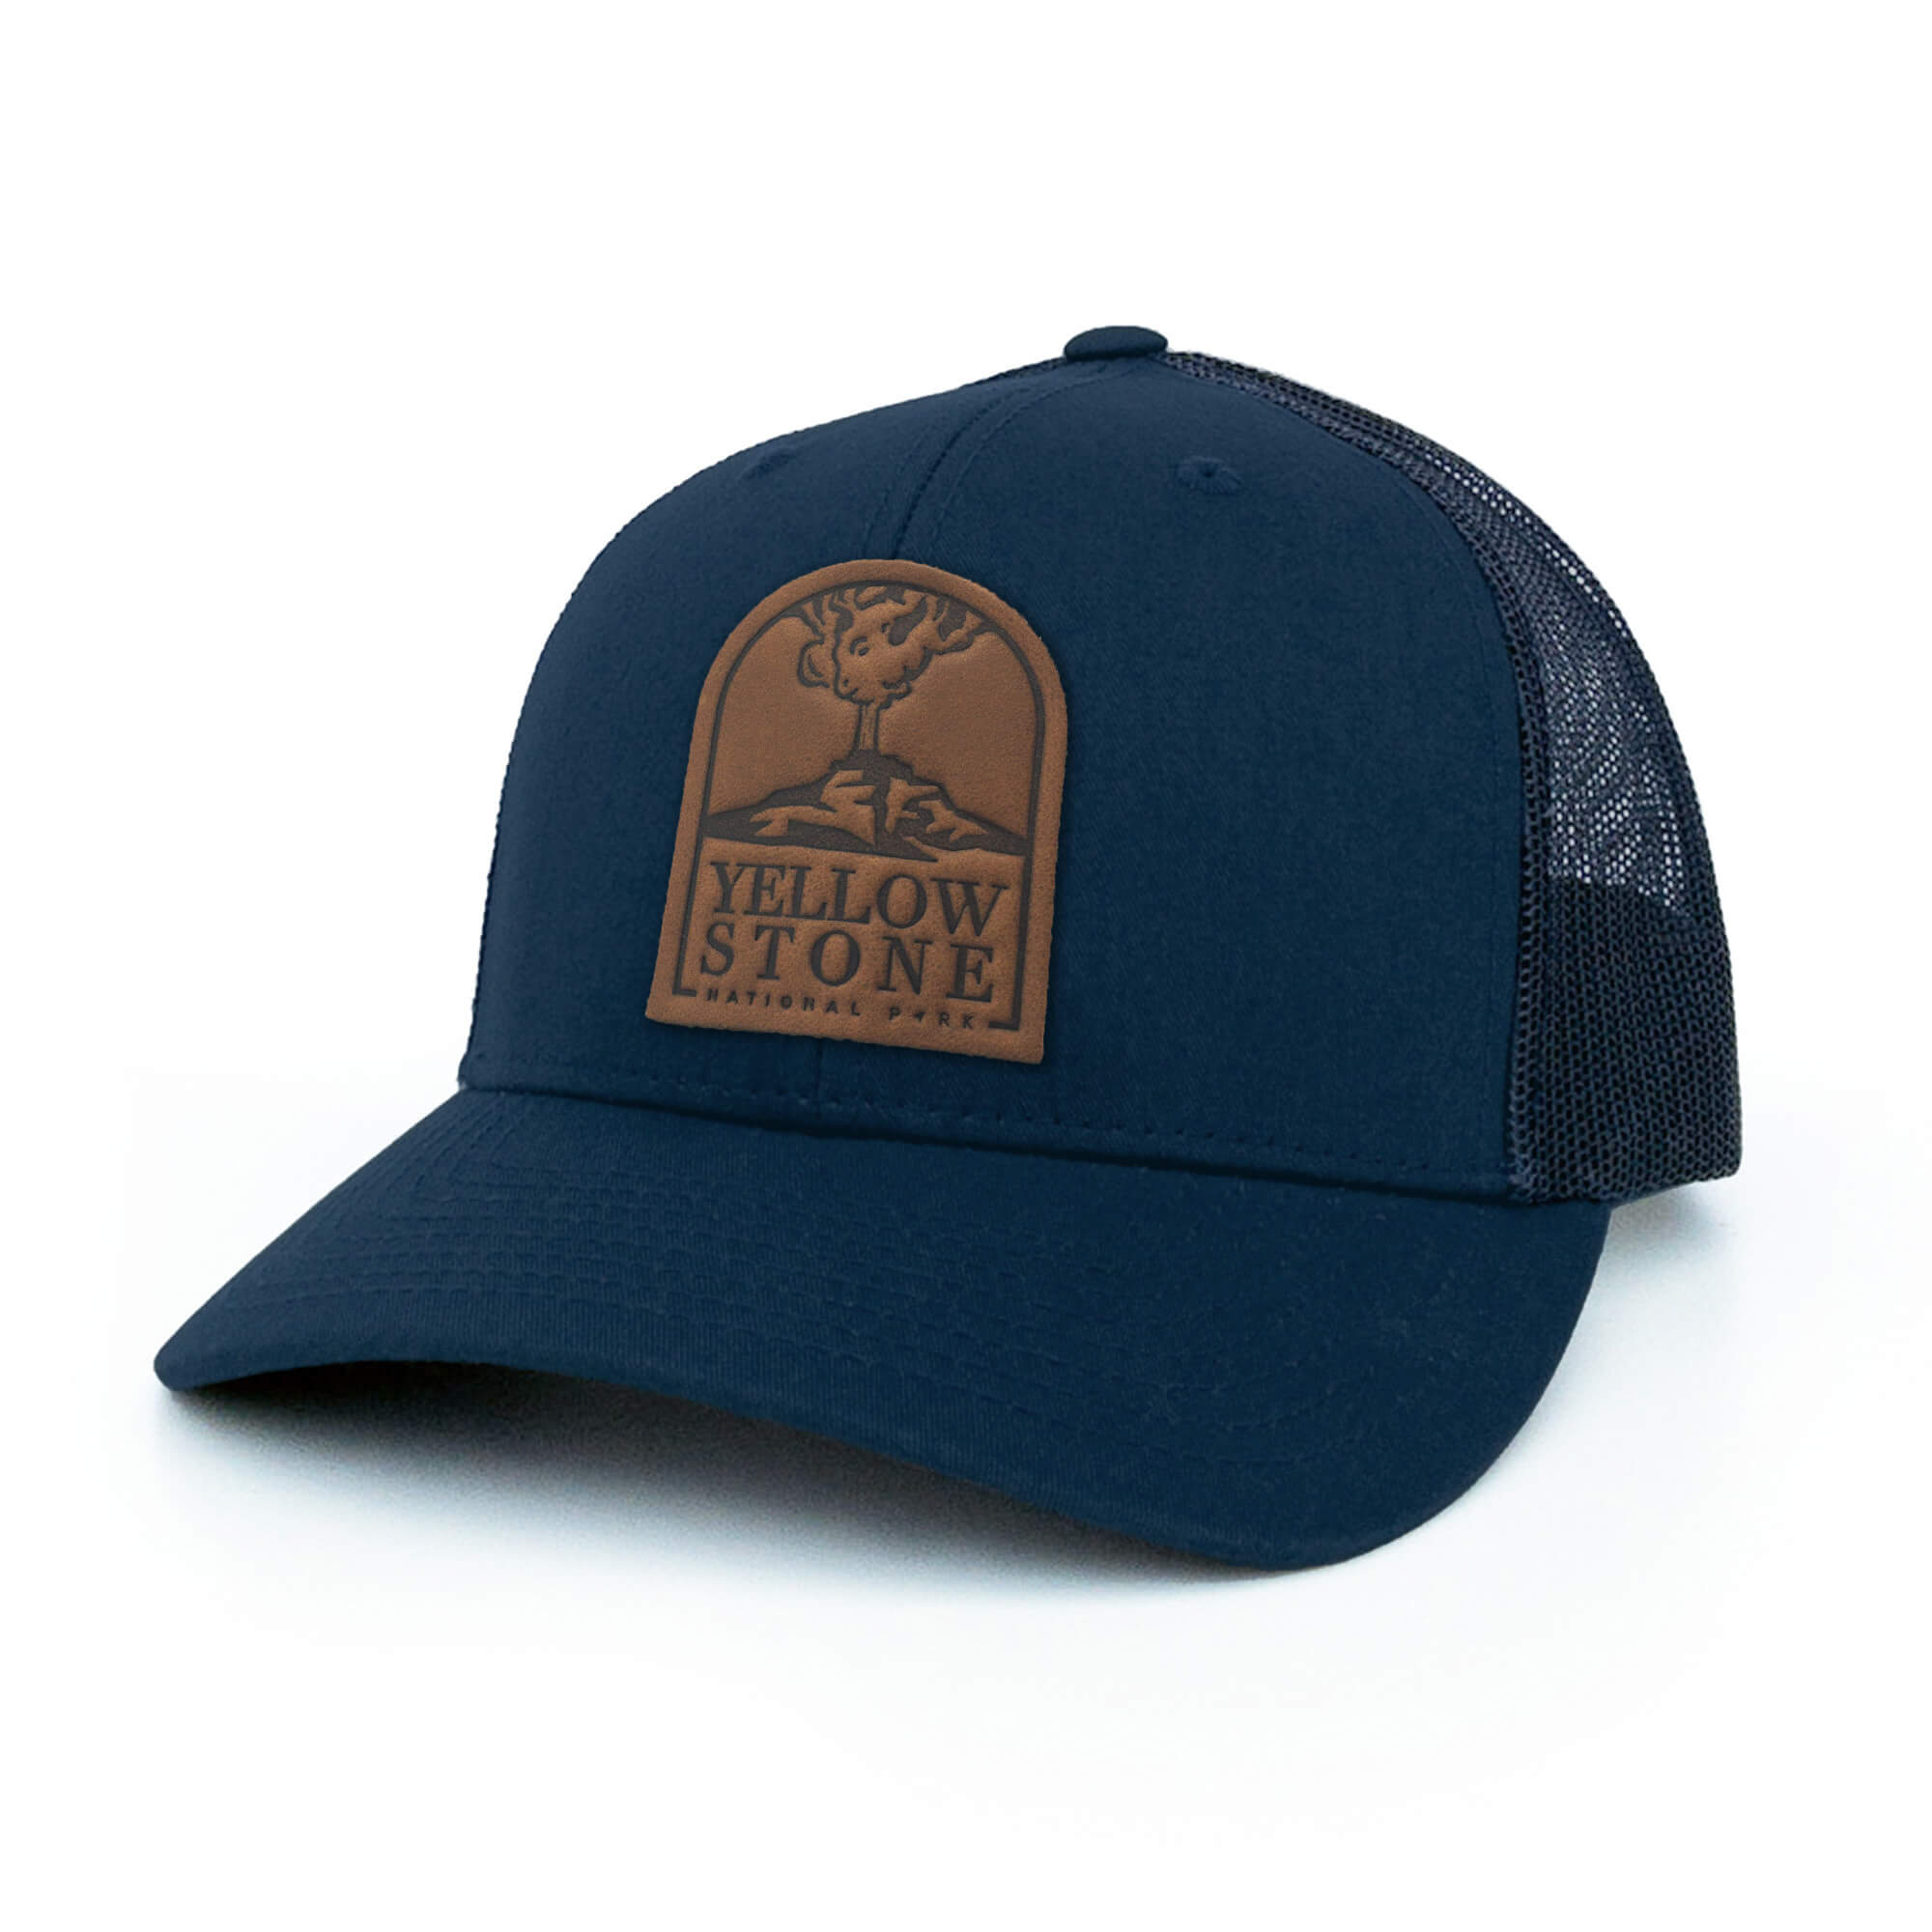 Navy trucker hat with full-grain leather patch of Yellowstone National Park | BLACK-007-005, CHARC-007-005, NAVY-007-005, HGREY-007-005, MOSS-007-005, BROWN-007-005